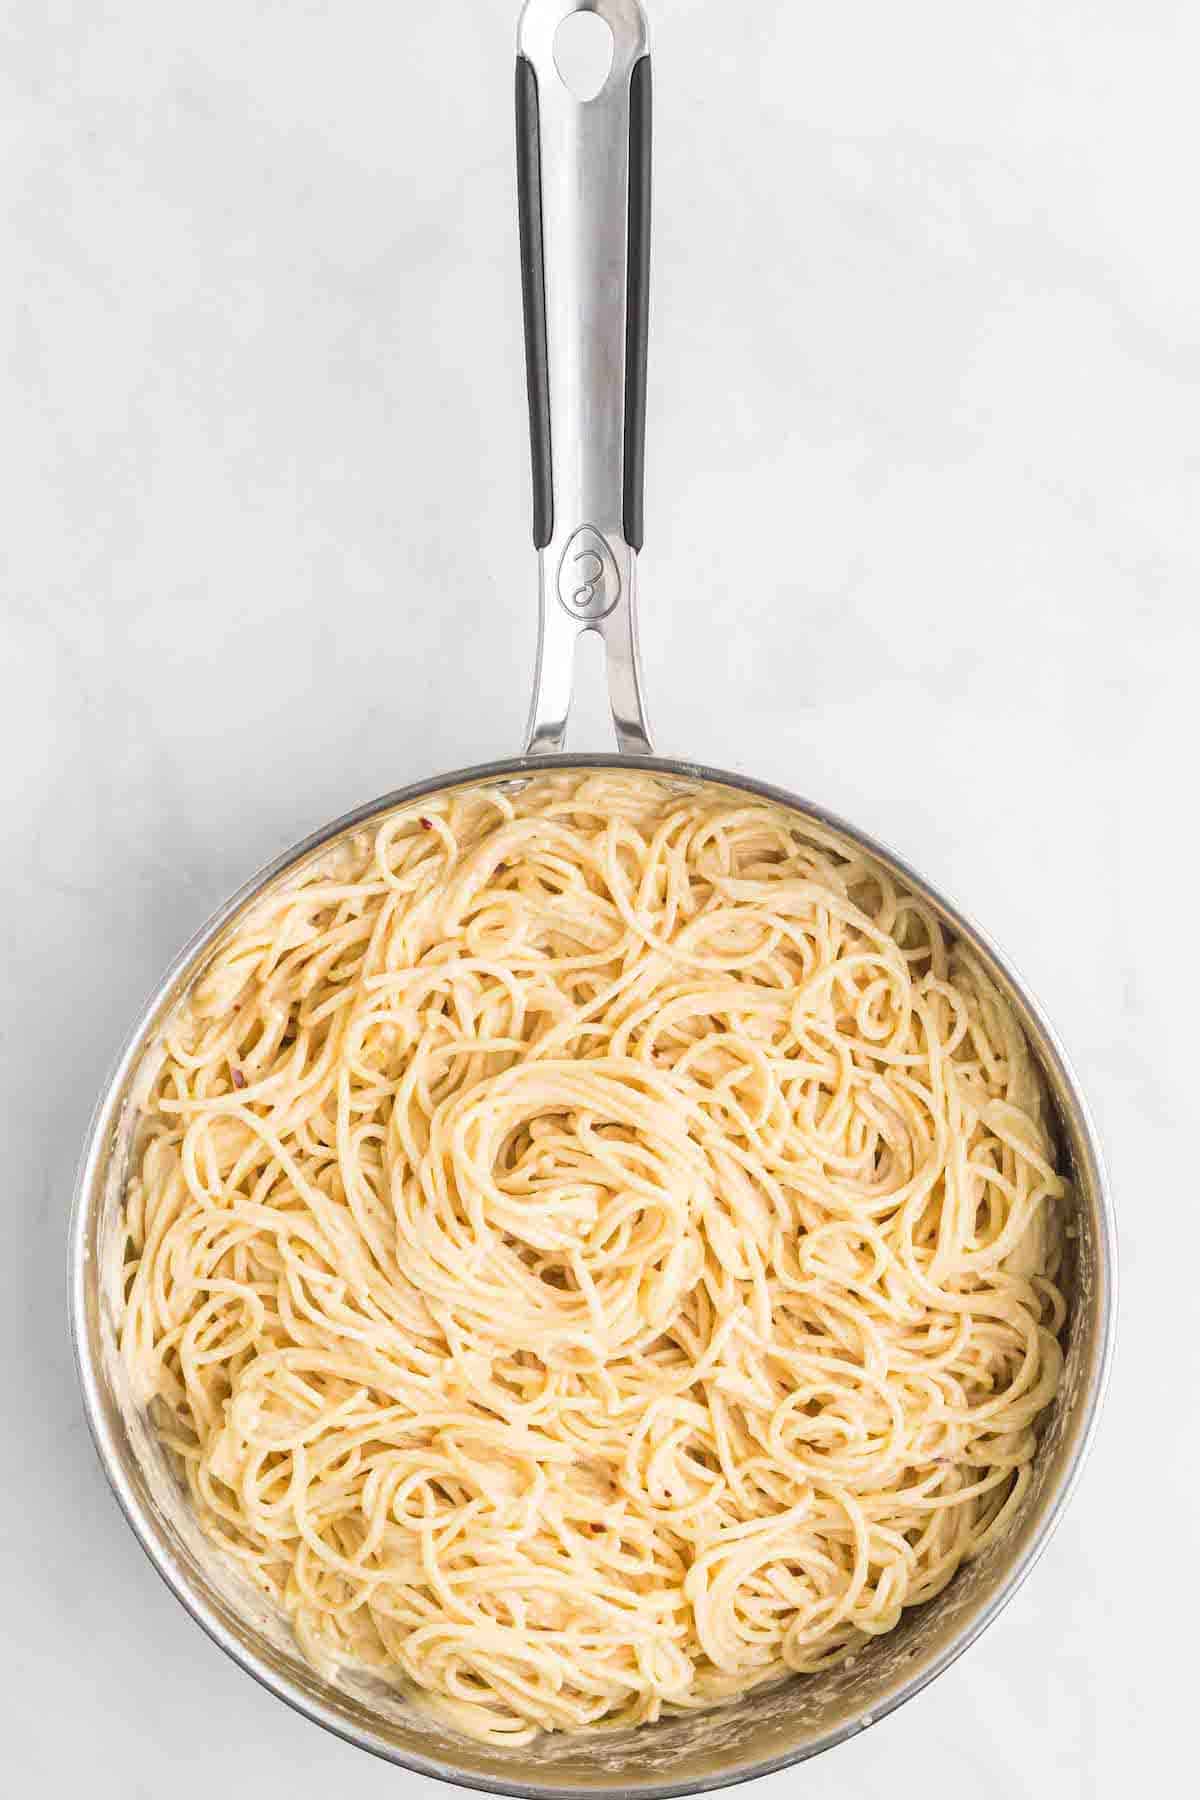 large skillet with the spaghetti noodles on top of the cream sauce.